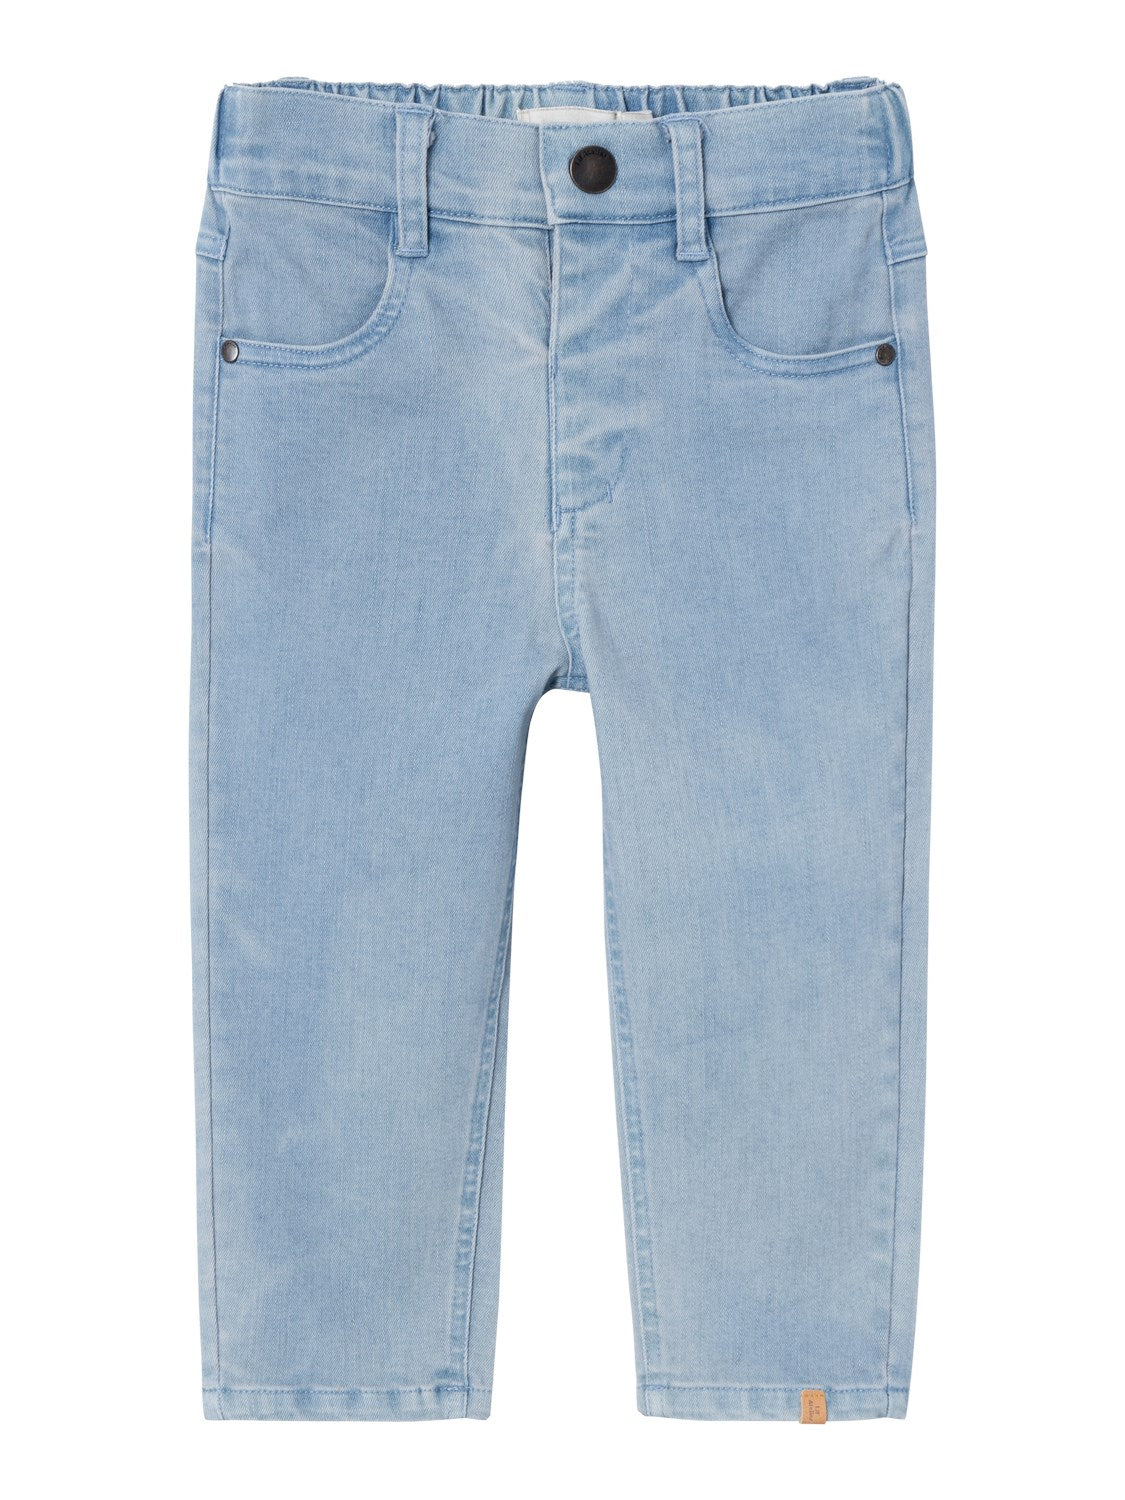 BERLIN TAPERED JEANS